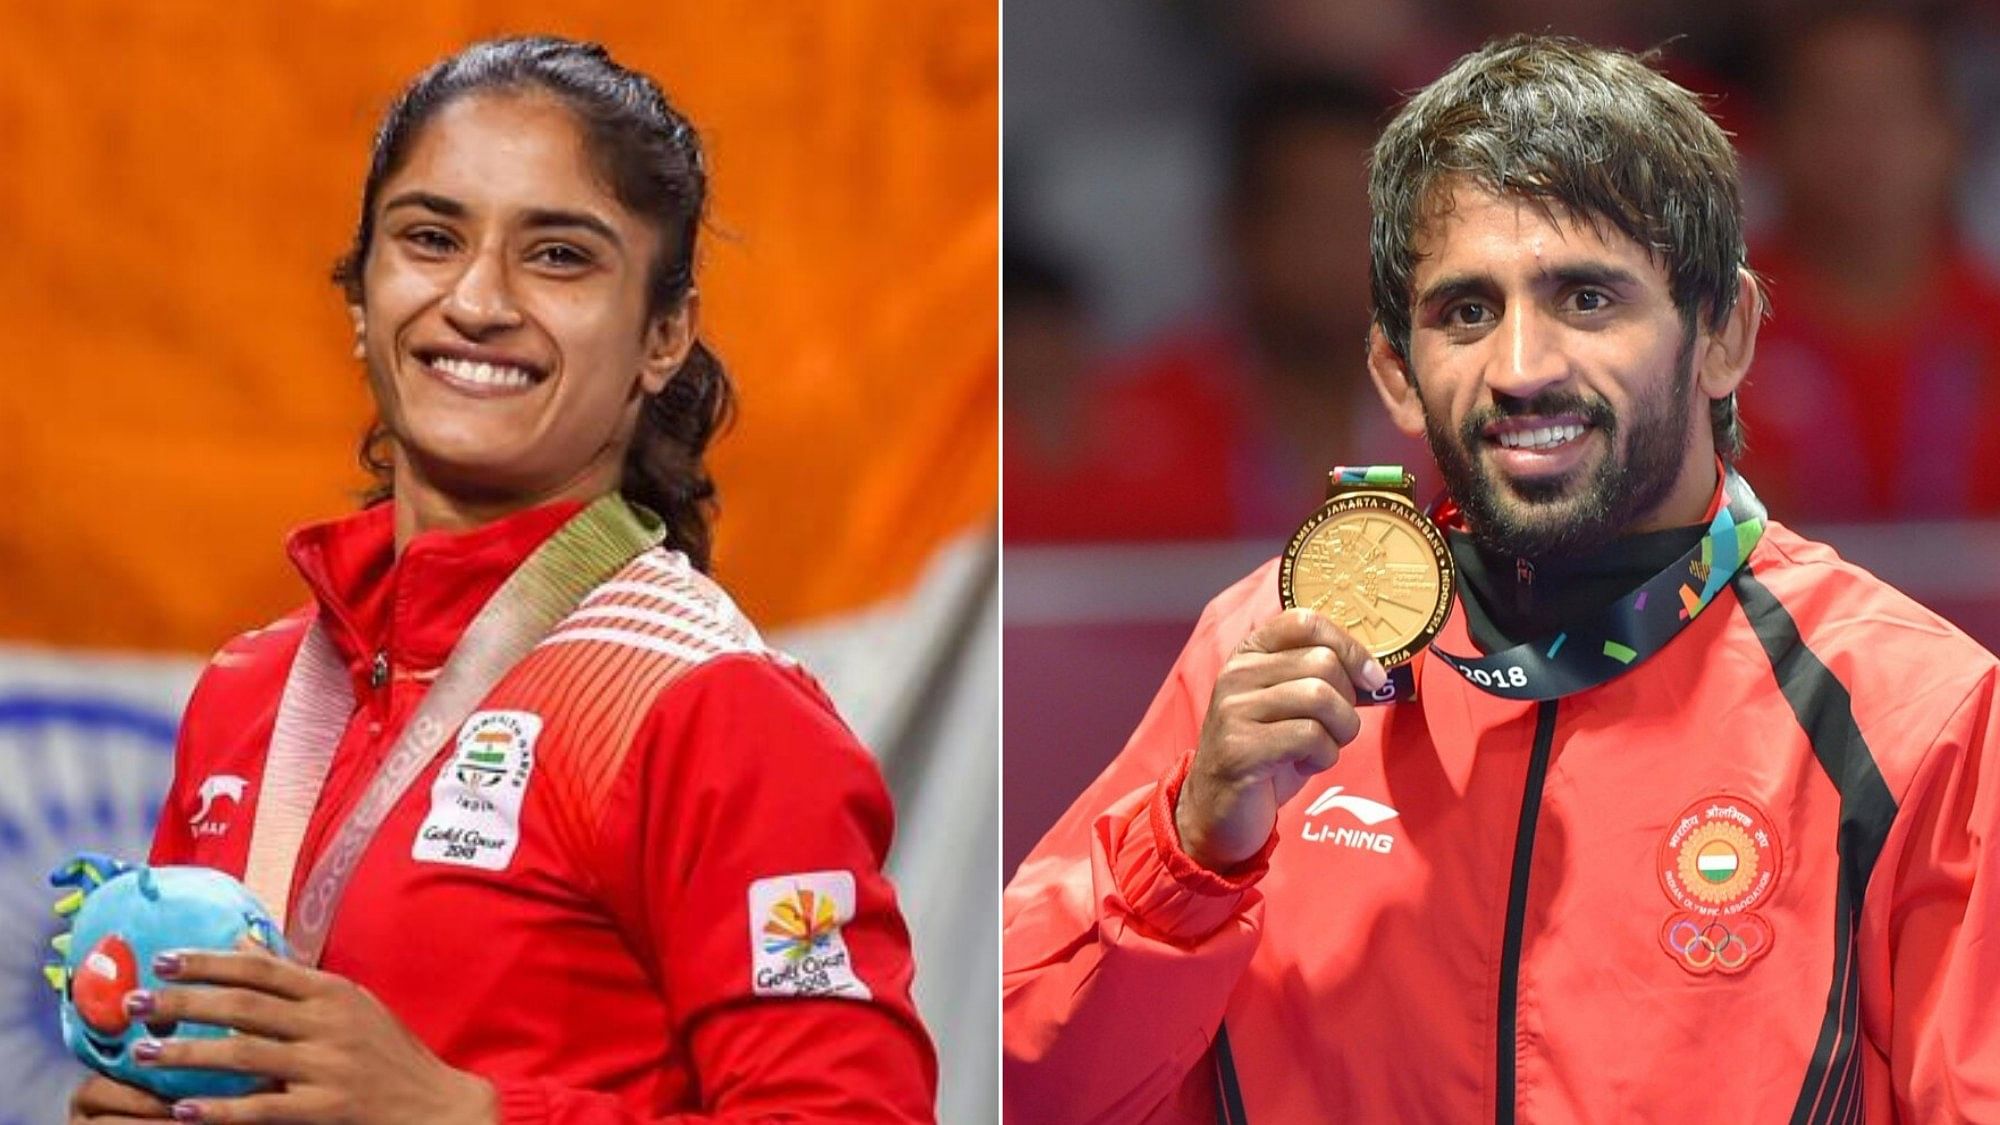 Both Vinesh Phogat (left) and Bajrang Punia had clinched bronze at the Wrestling World Championships last year.